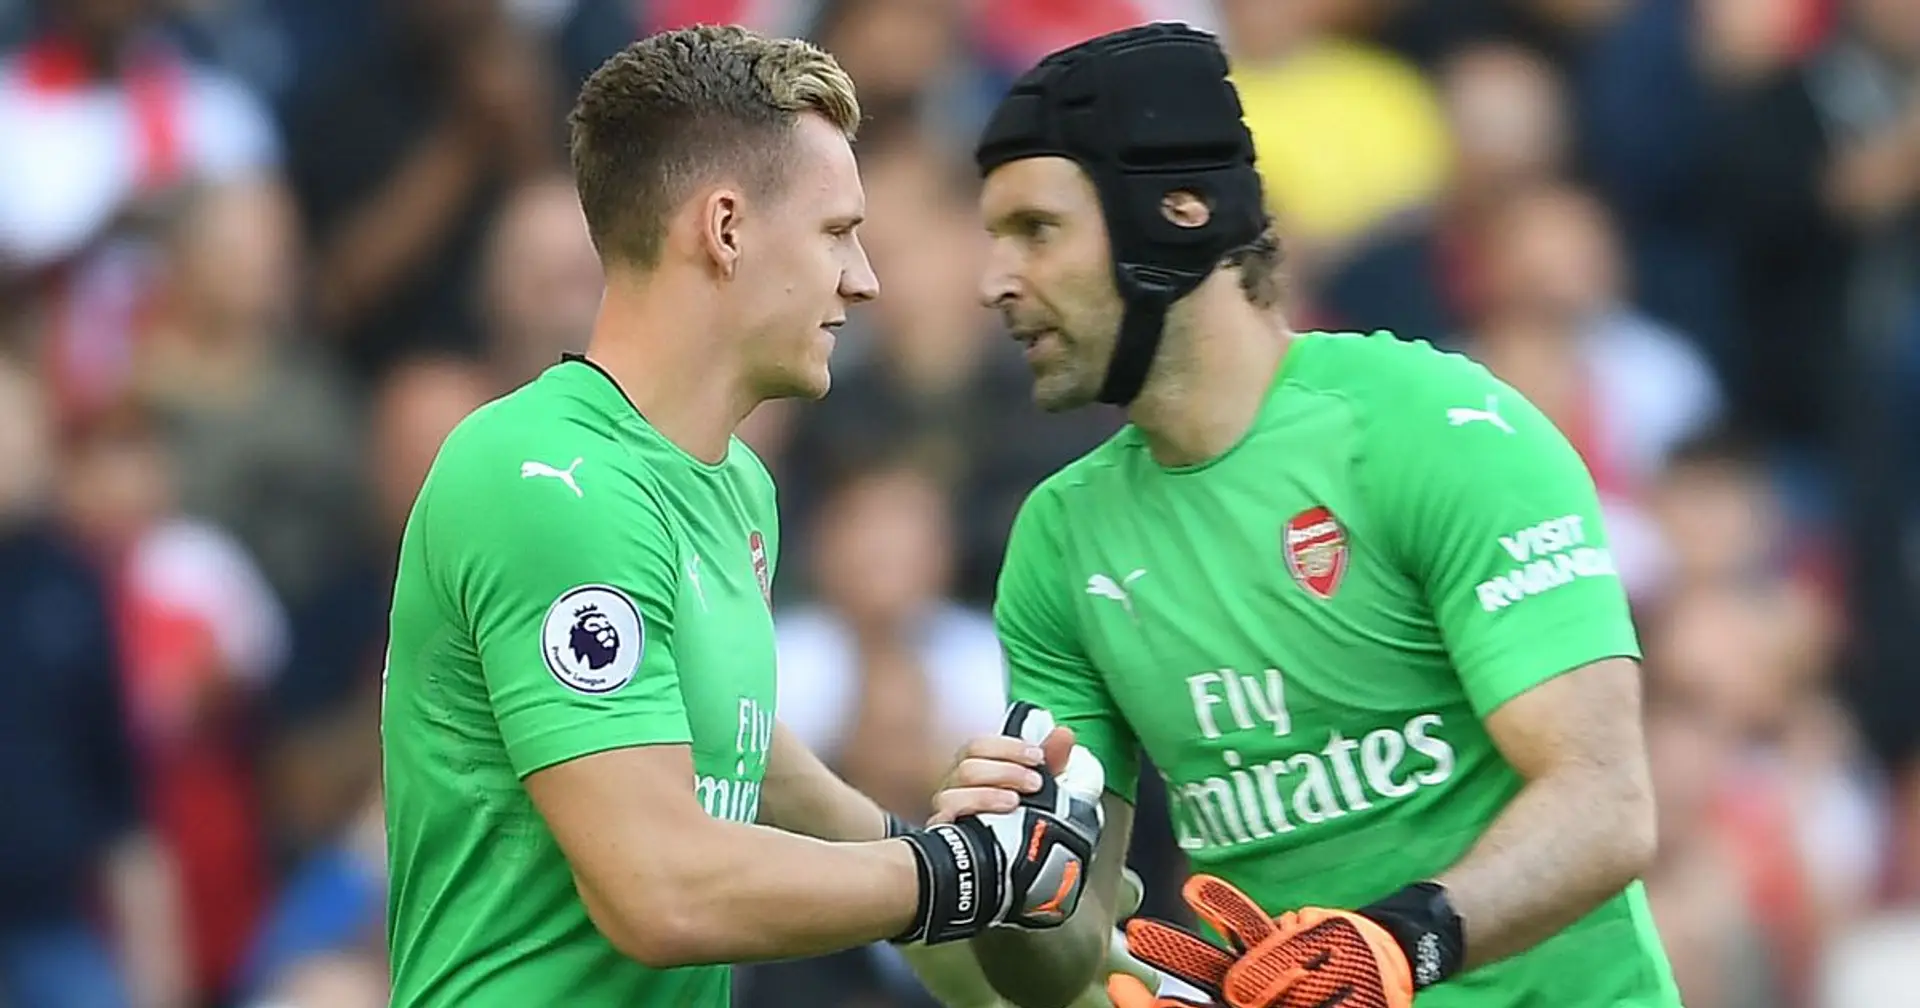 'There’s a fine line between self-belief and arrogance and those two get it spot on': Macey on Leno, Cech elite mentality